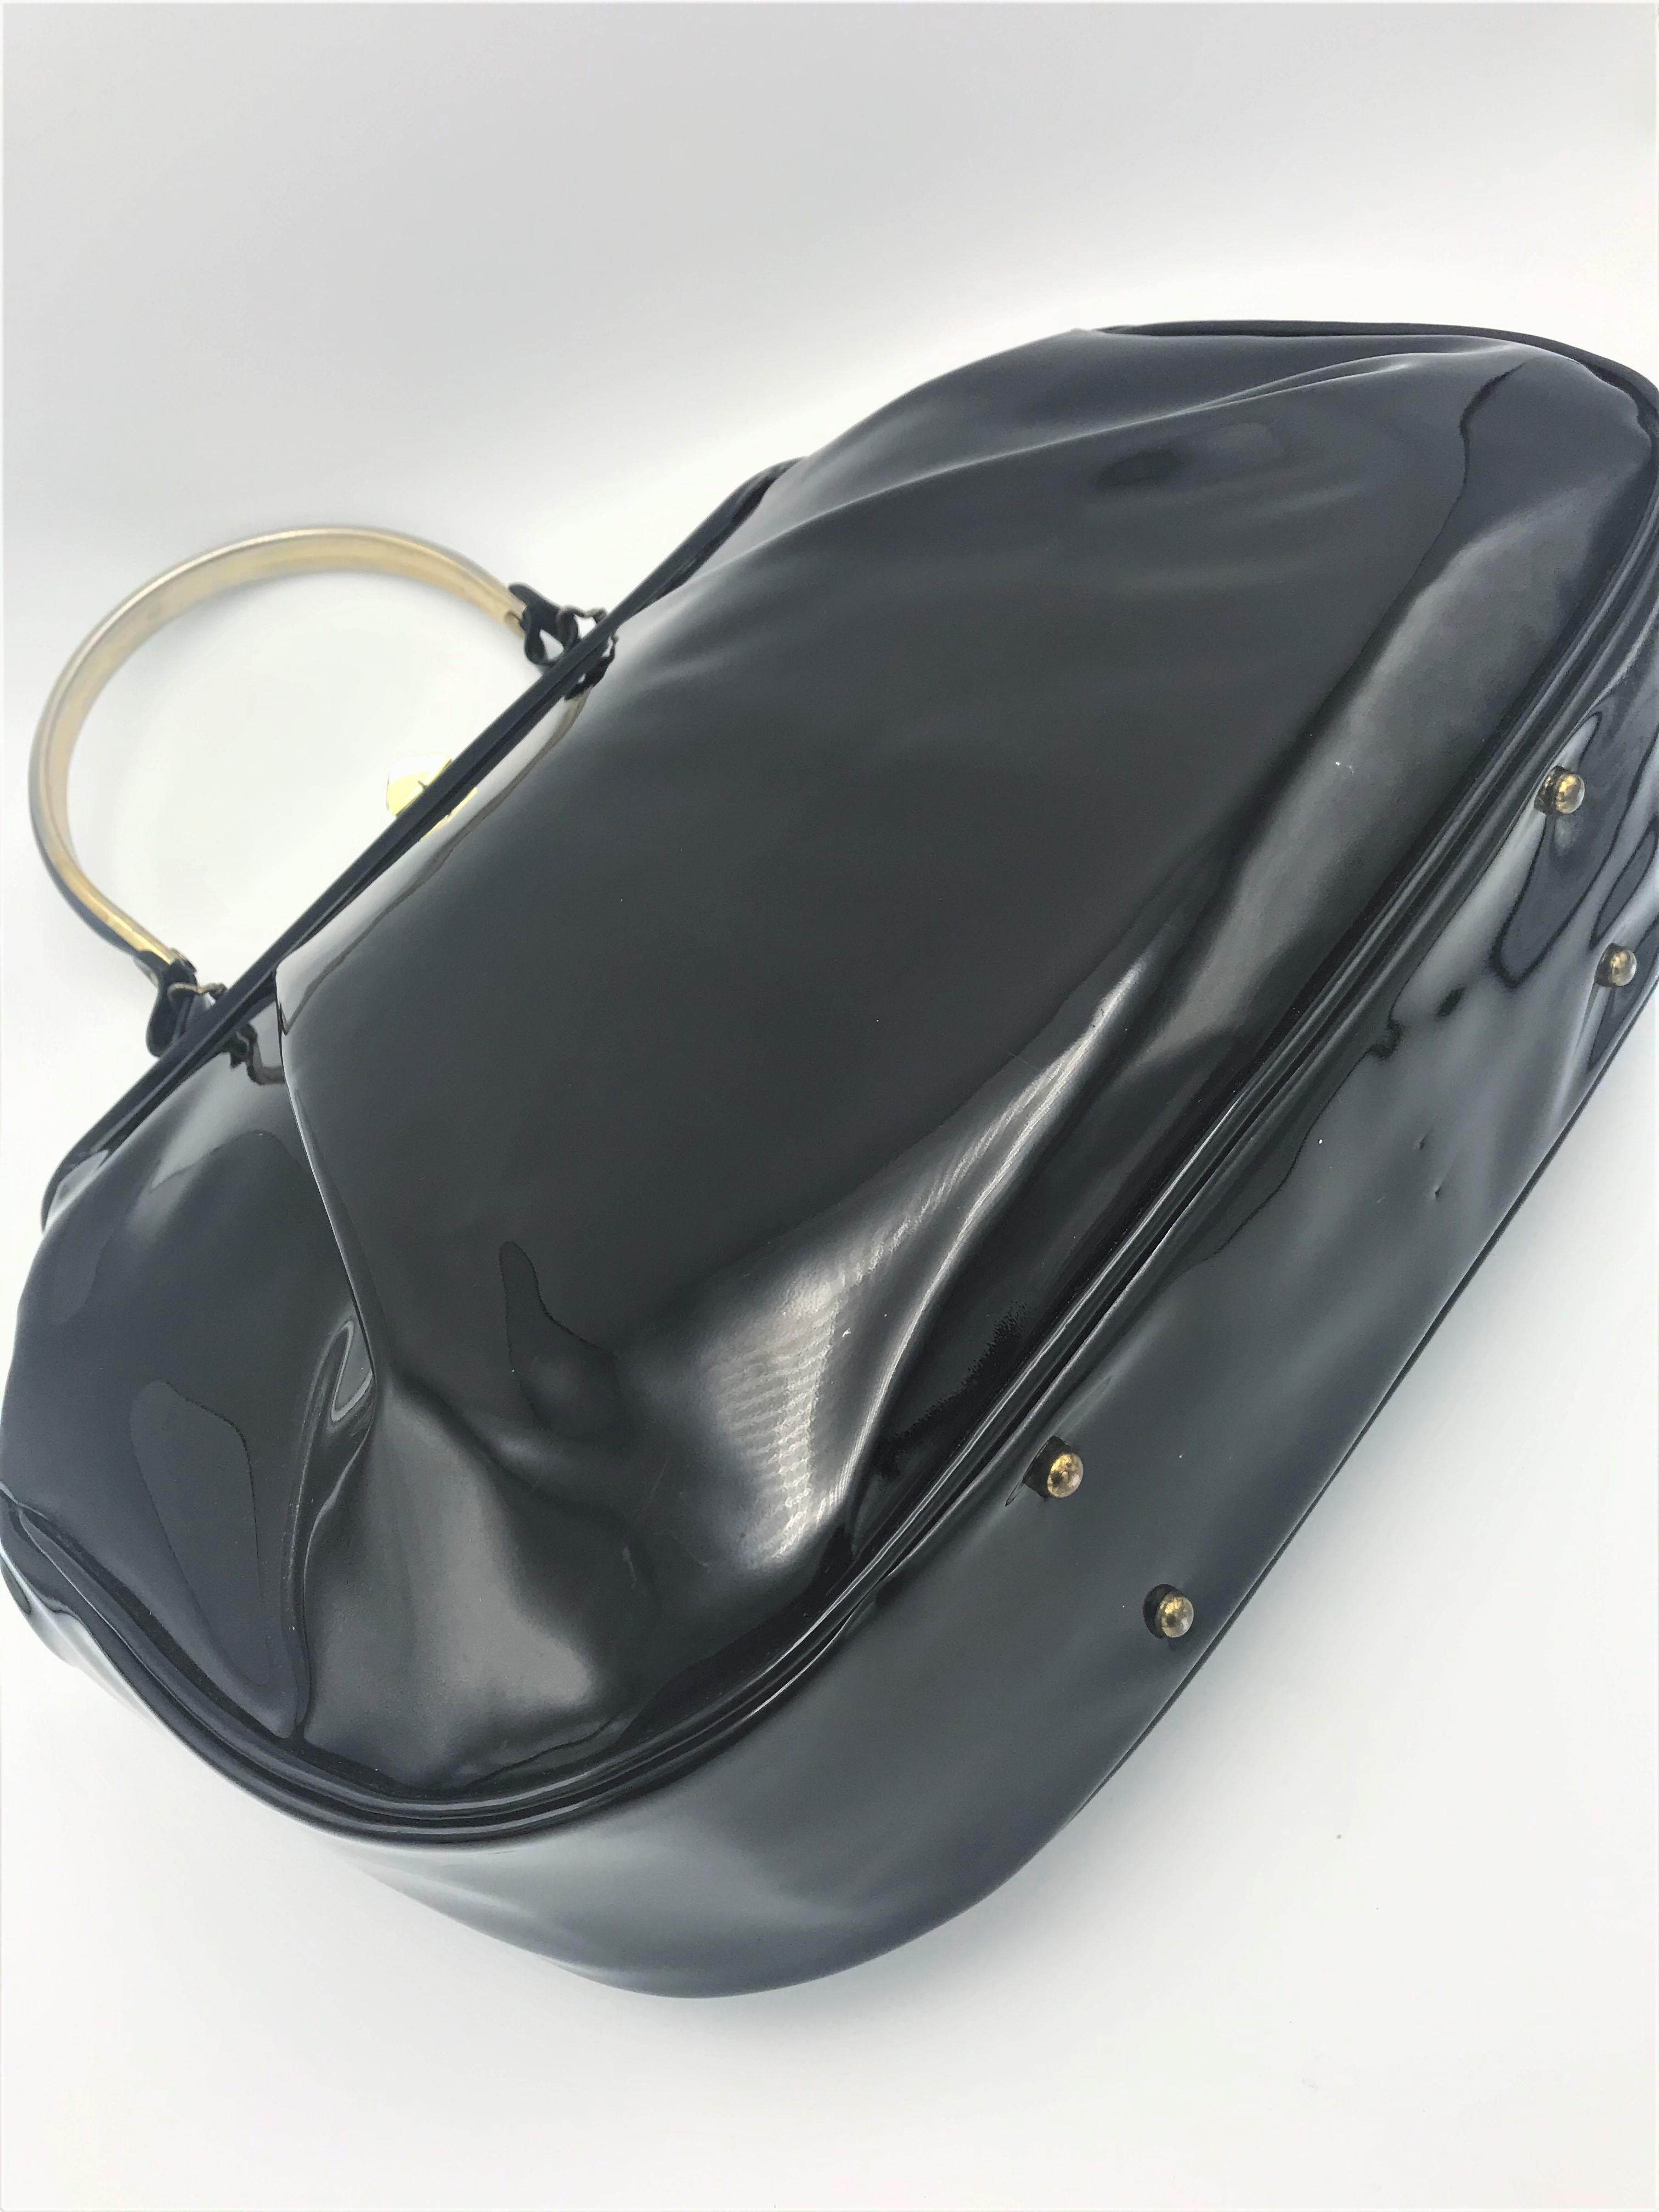 A distinctive black handbag made of beautiful and well-preserved patent leather wich has a handle 30 cm long. The opening is 30 cm wide, the front and back of the bag have a 3 cm deep fold. Lined inside with black-white fabric and a side pocket with